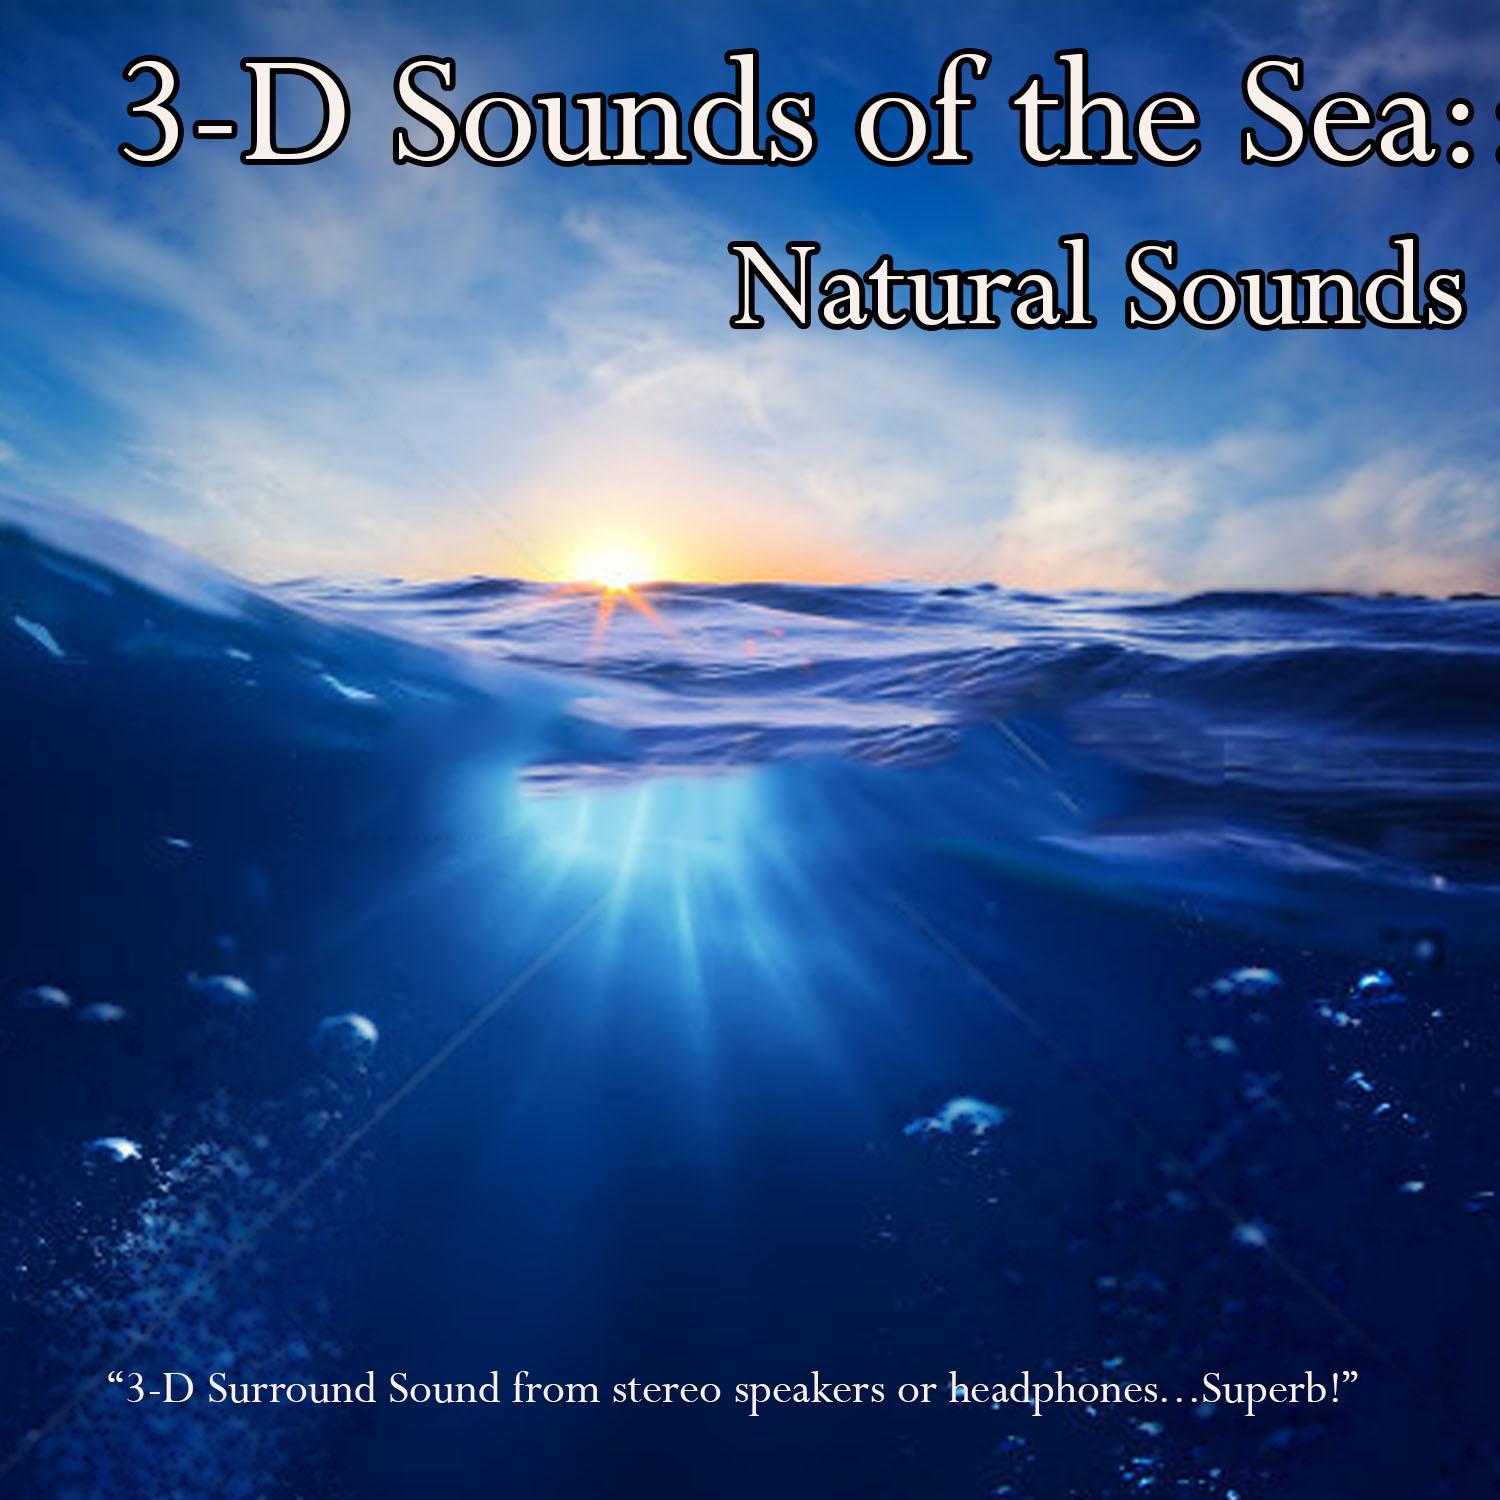 3-D Sounds of the Sea: Natural Sounds